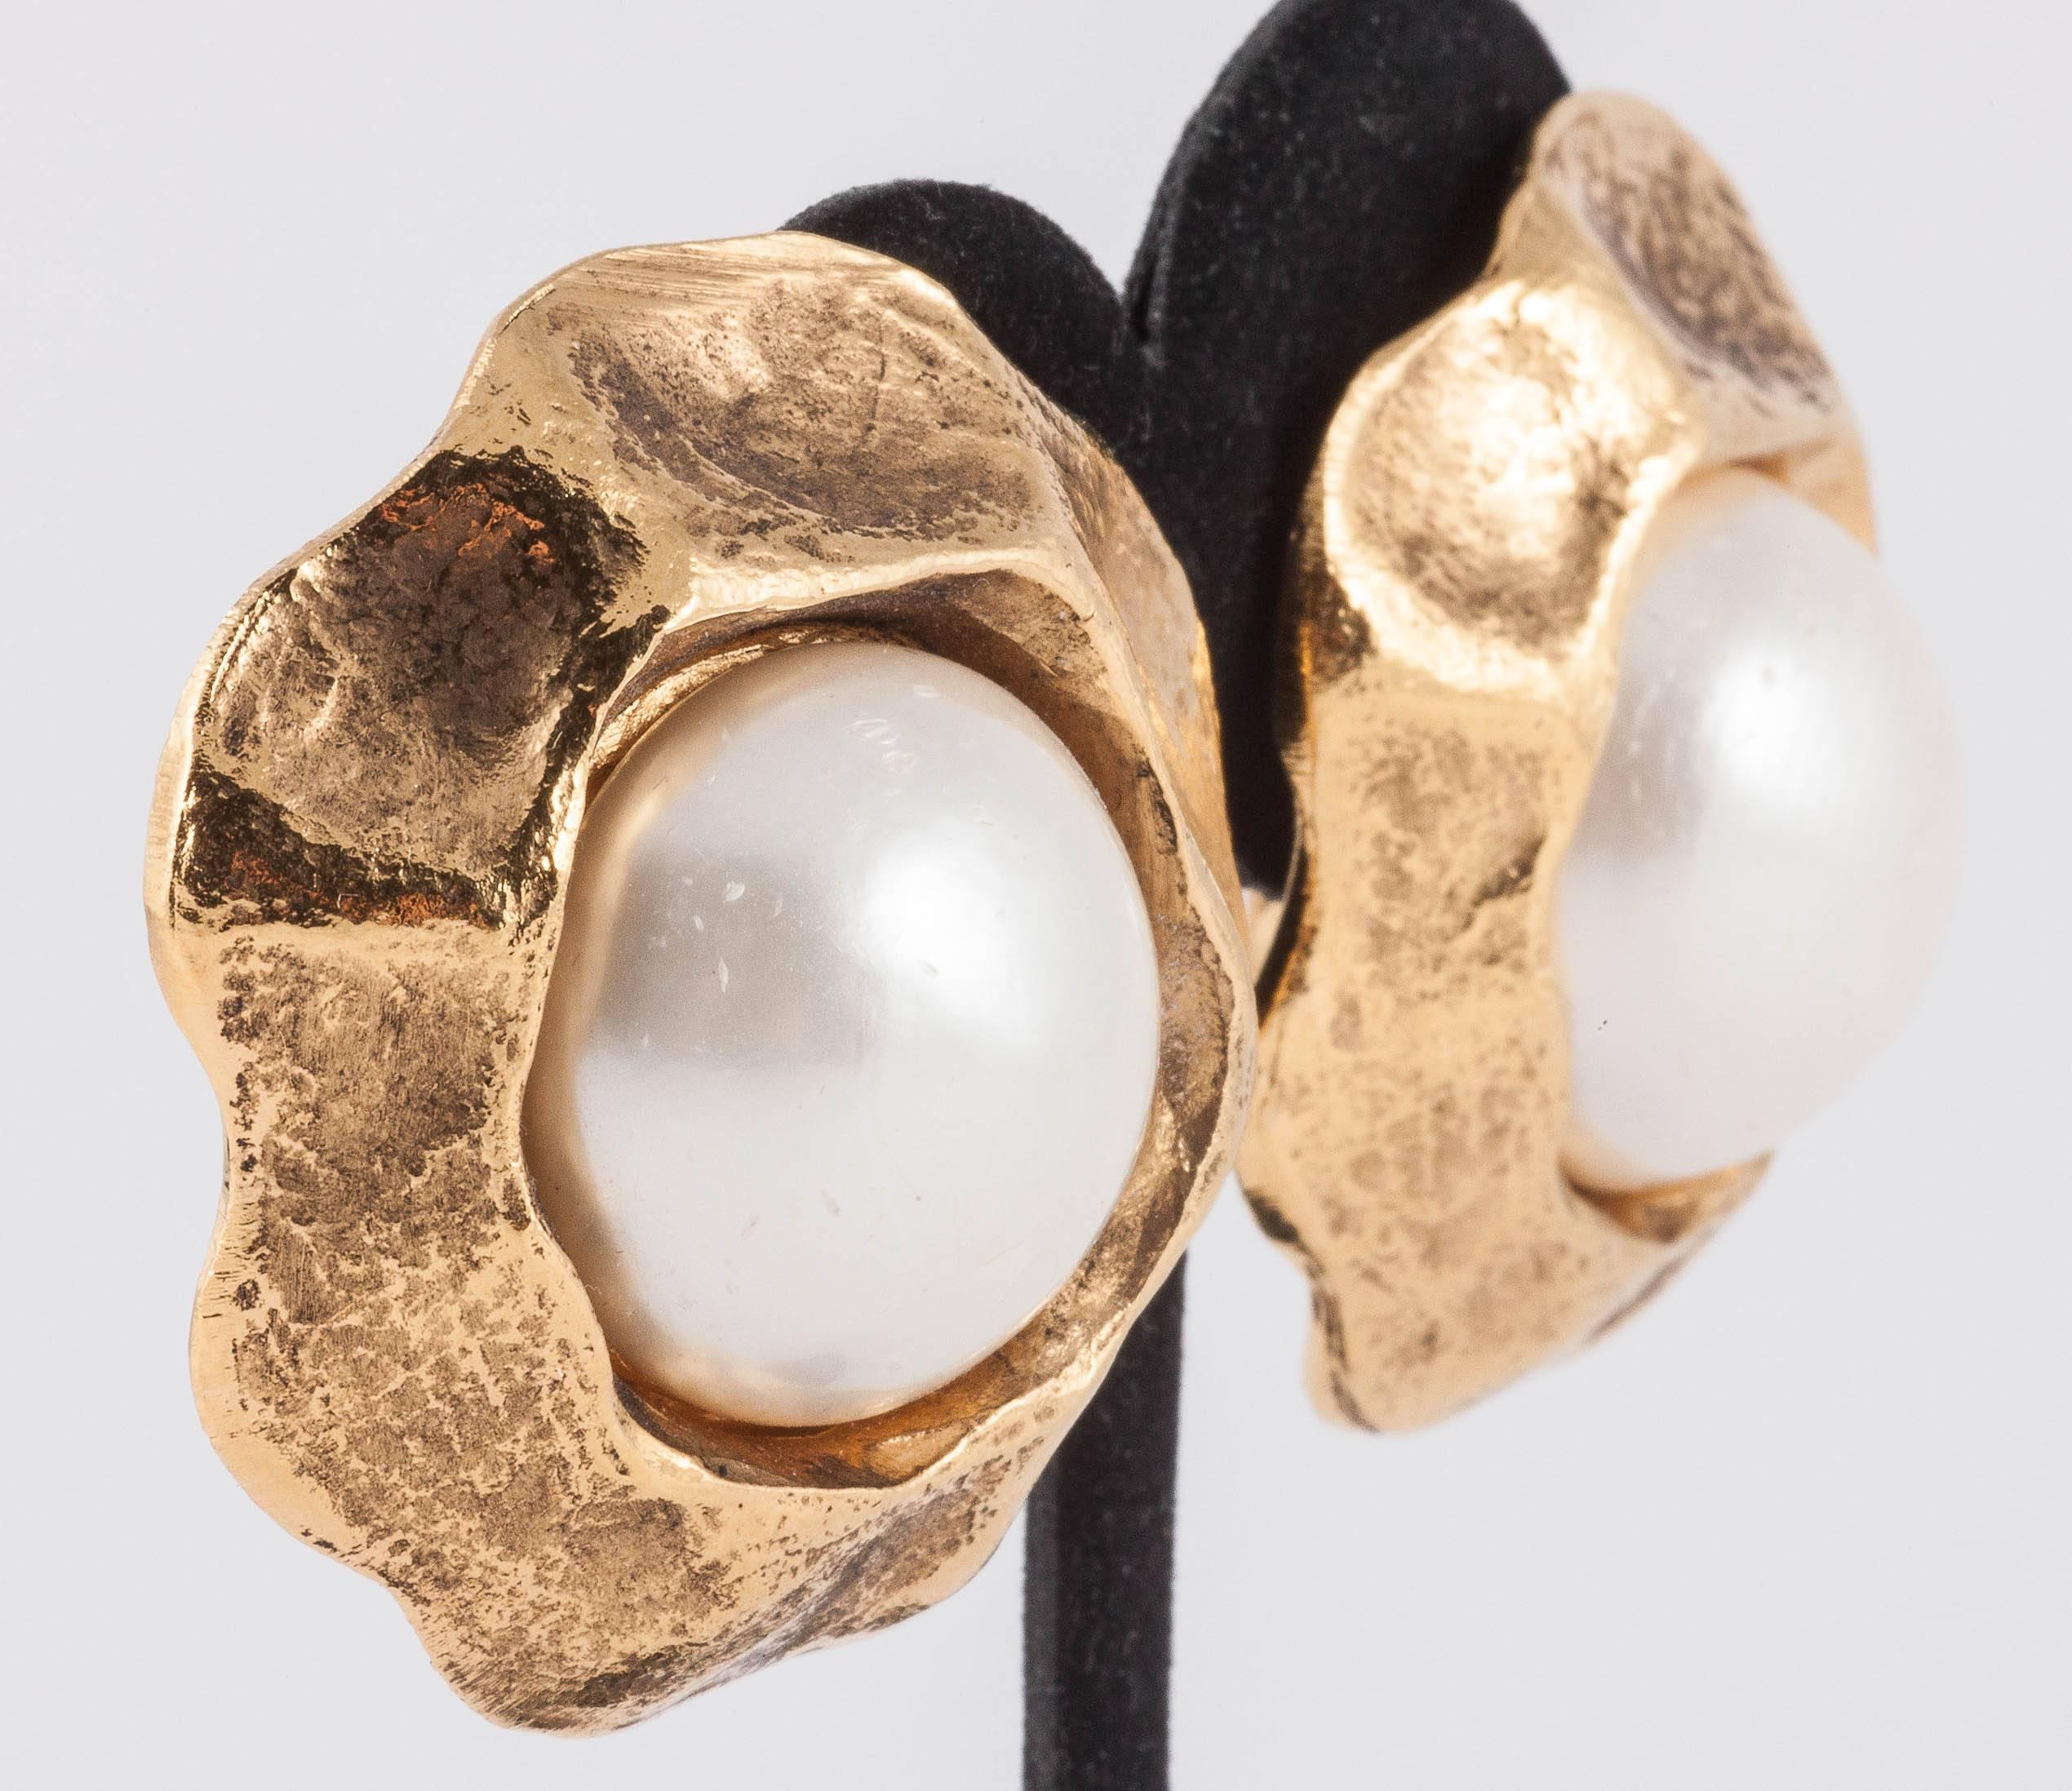 These earrings are classic of Chanel of the 1980s. A really strong statement pair of earrings but with a lovely stylised flower like shape, these have a very rich colour of gilding. When worn, they sit snug to the ear and frame the face beautifully.